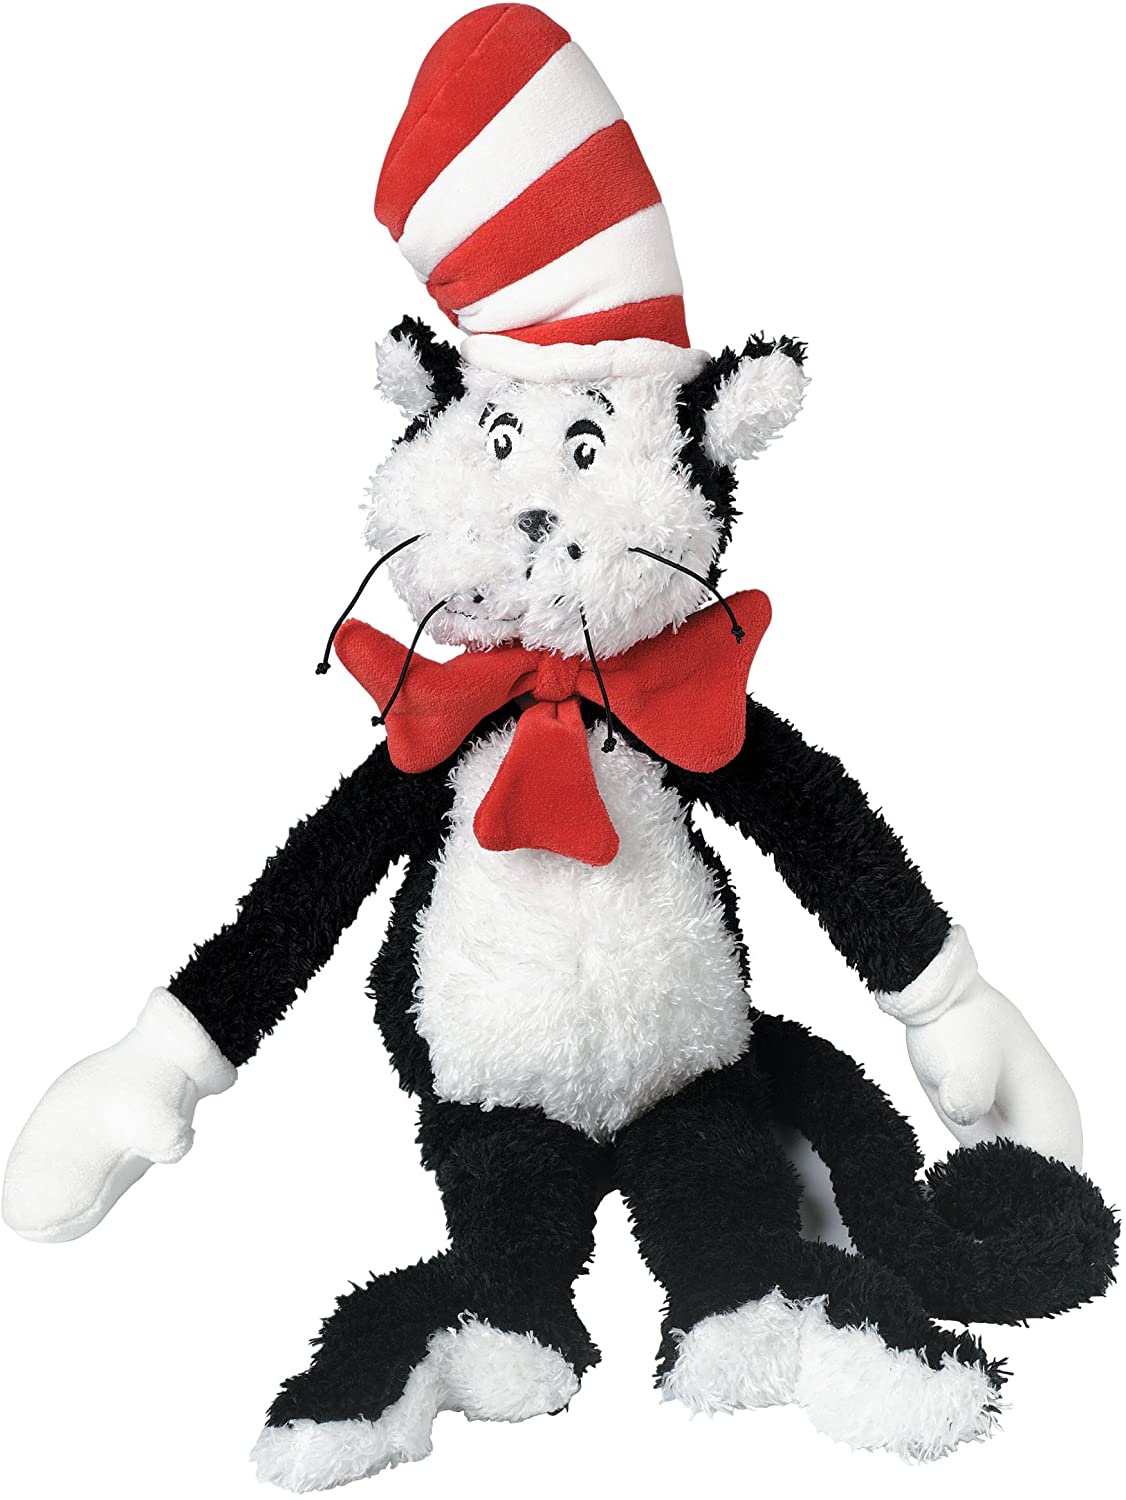 Cat in the Hat: Small 9" - Ages 0+